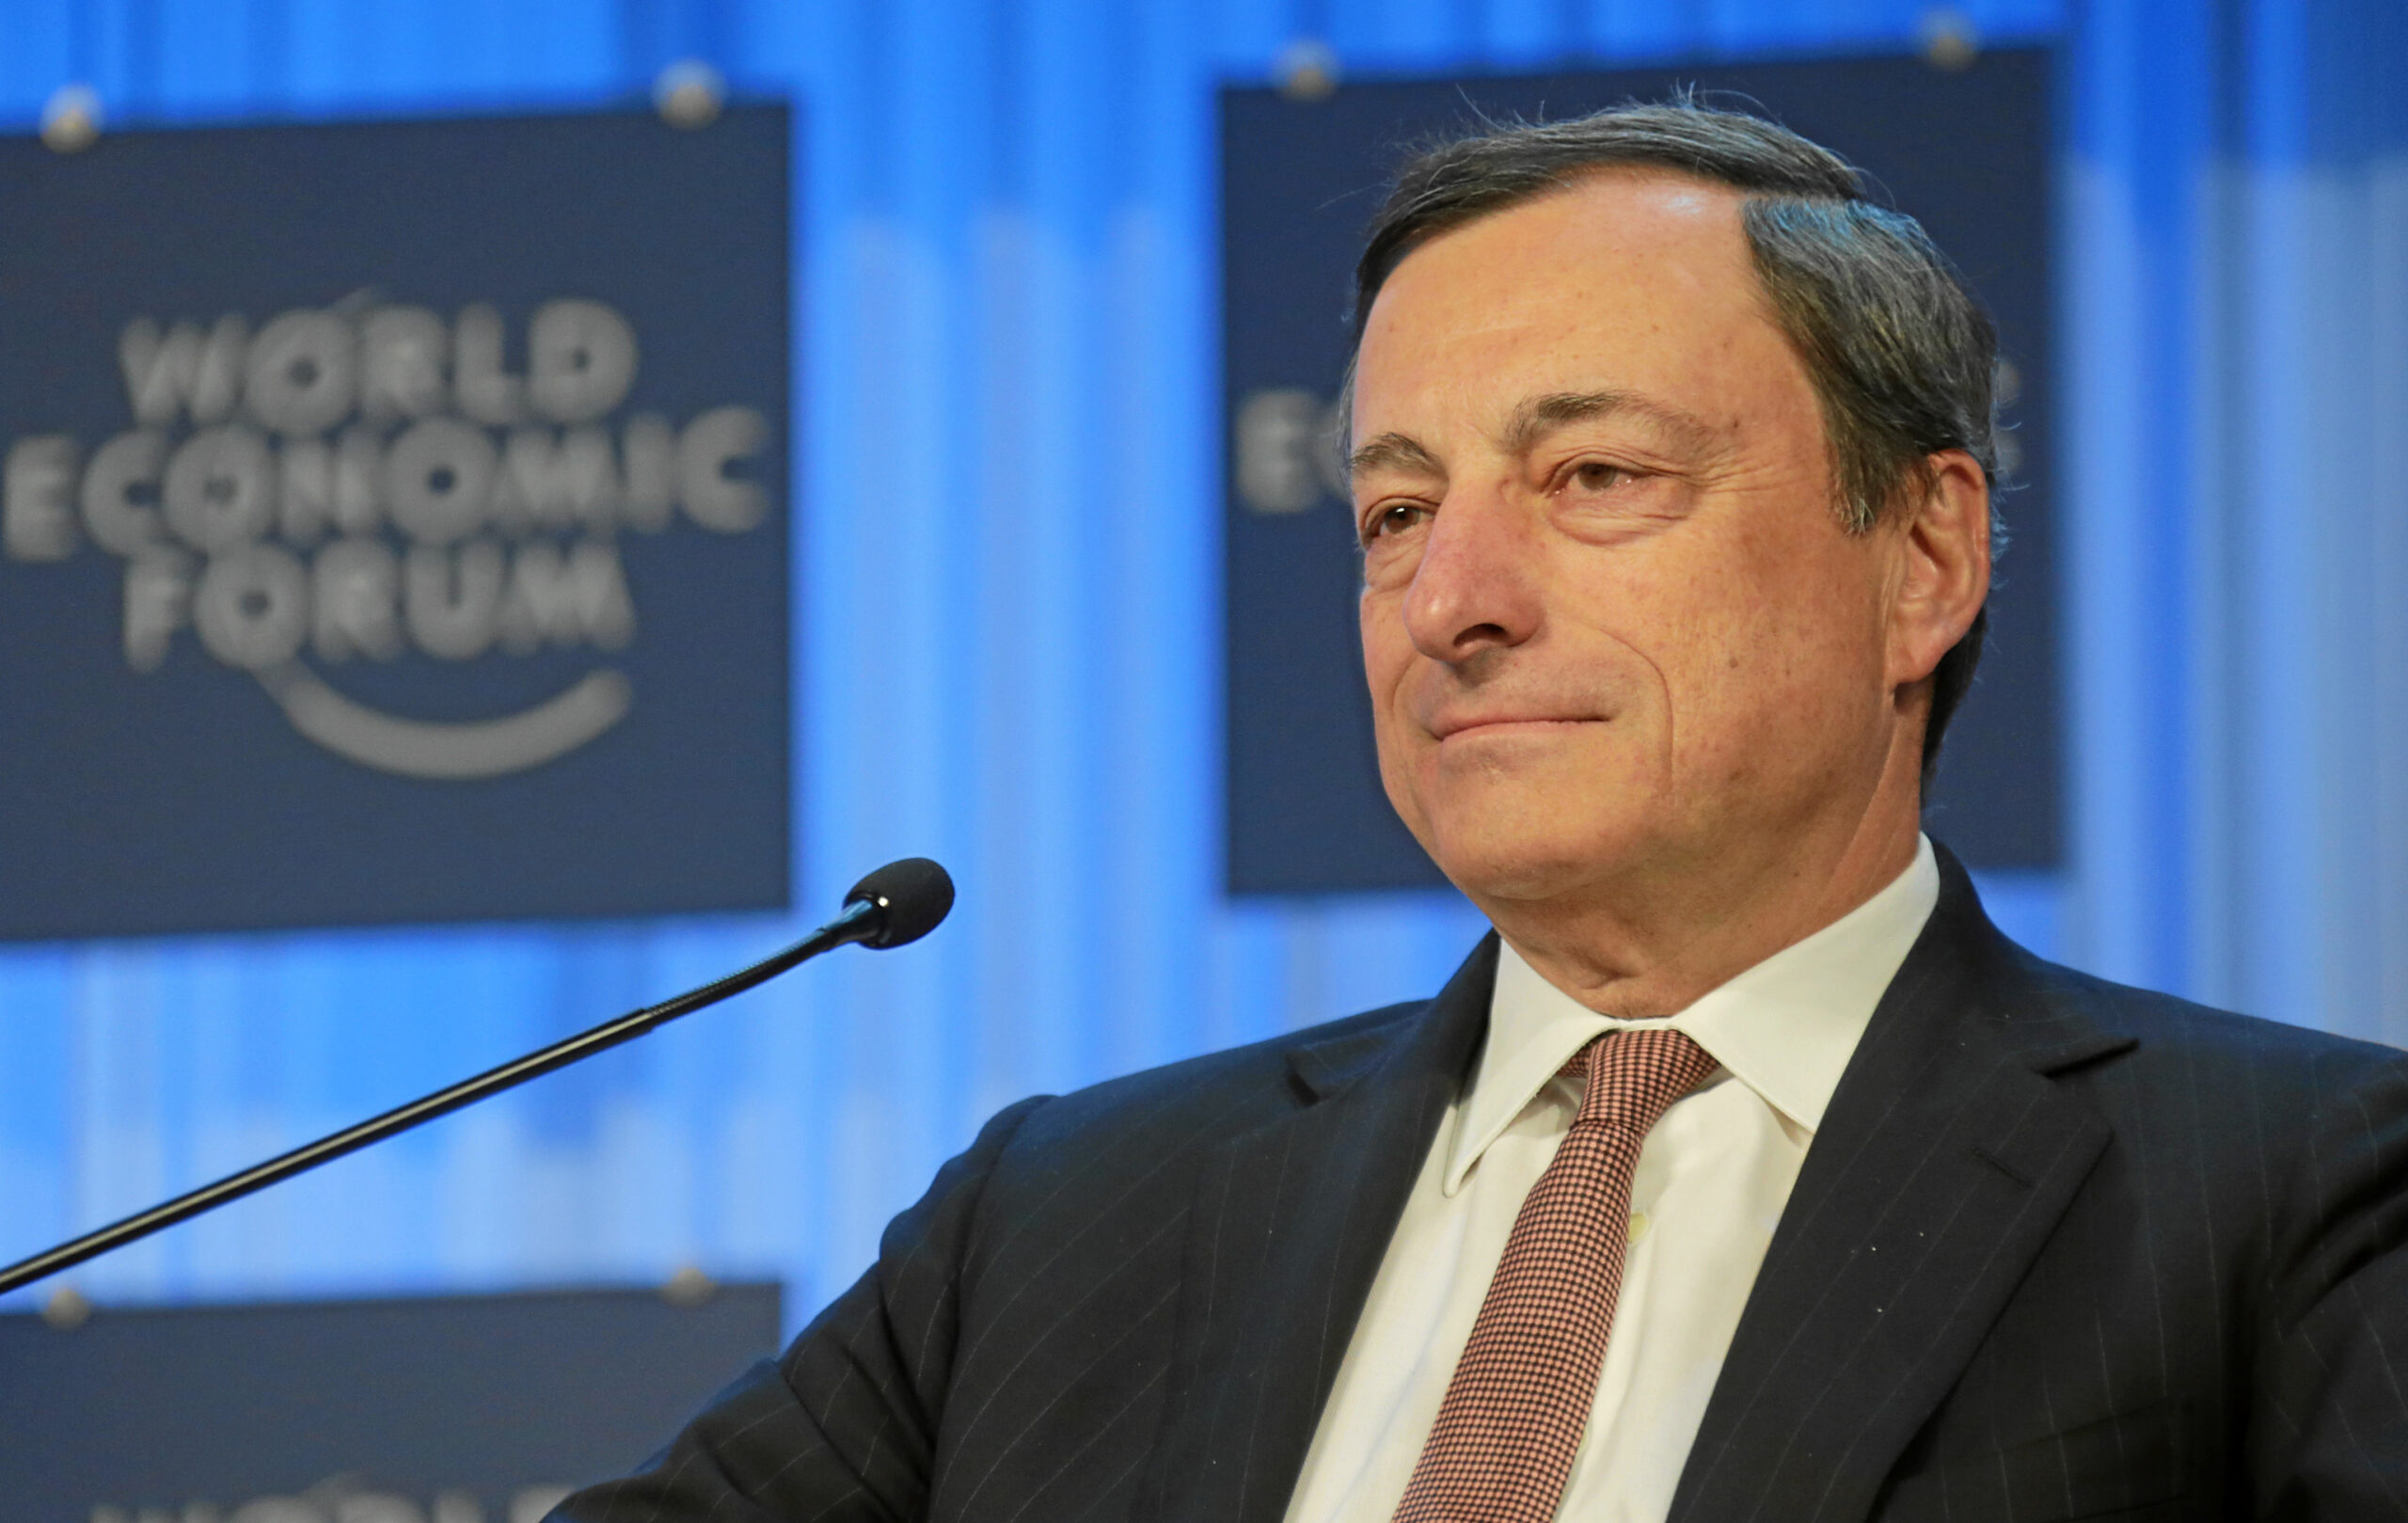 Italian politics: Draghi leaves his mark even as the coalition collapses